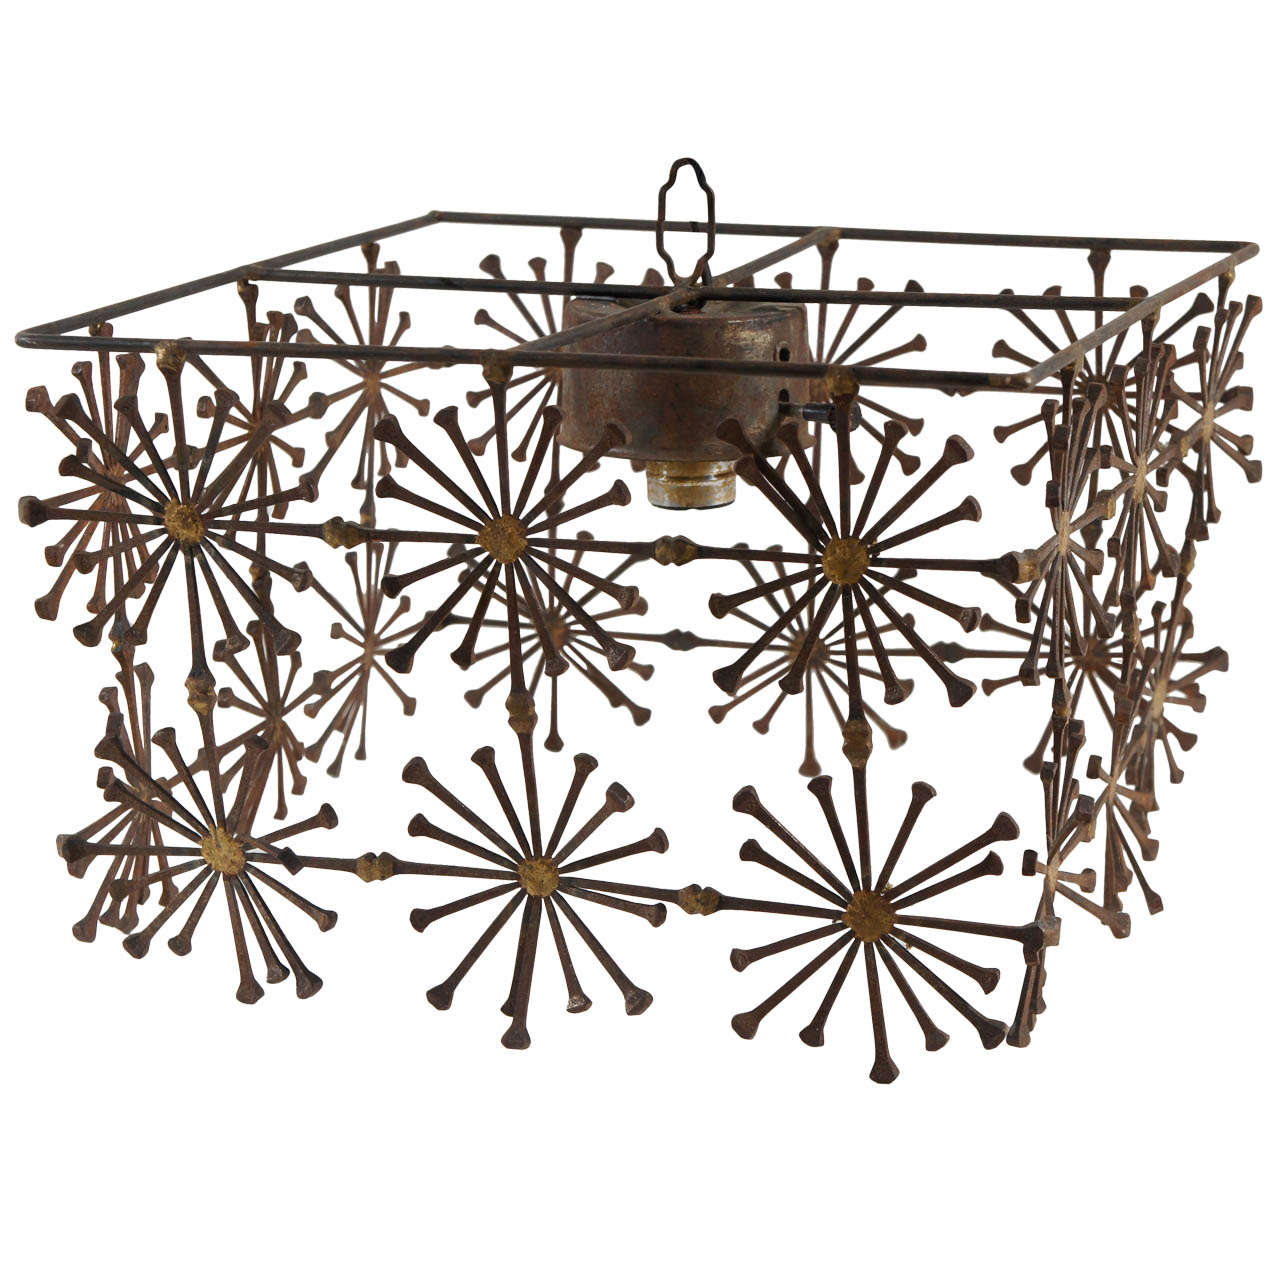 A Boxed Iron Chandelier with Sunburst Detail